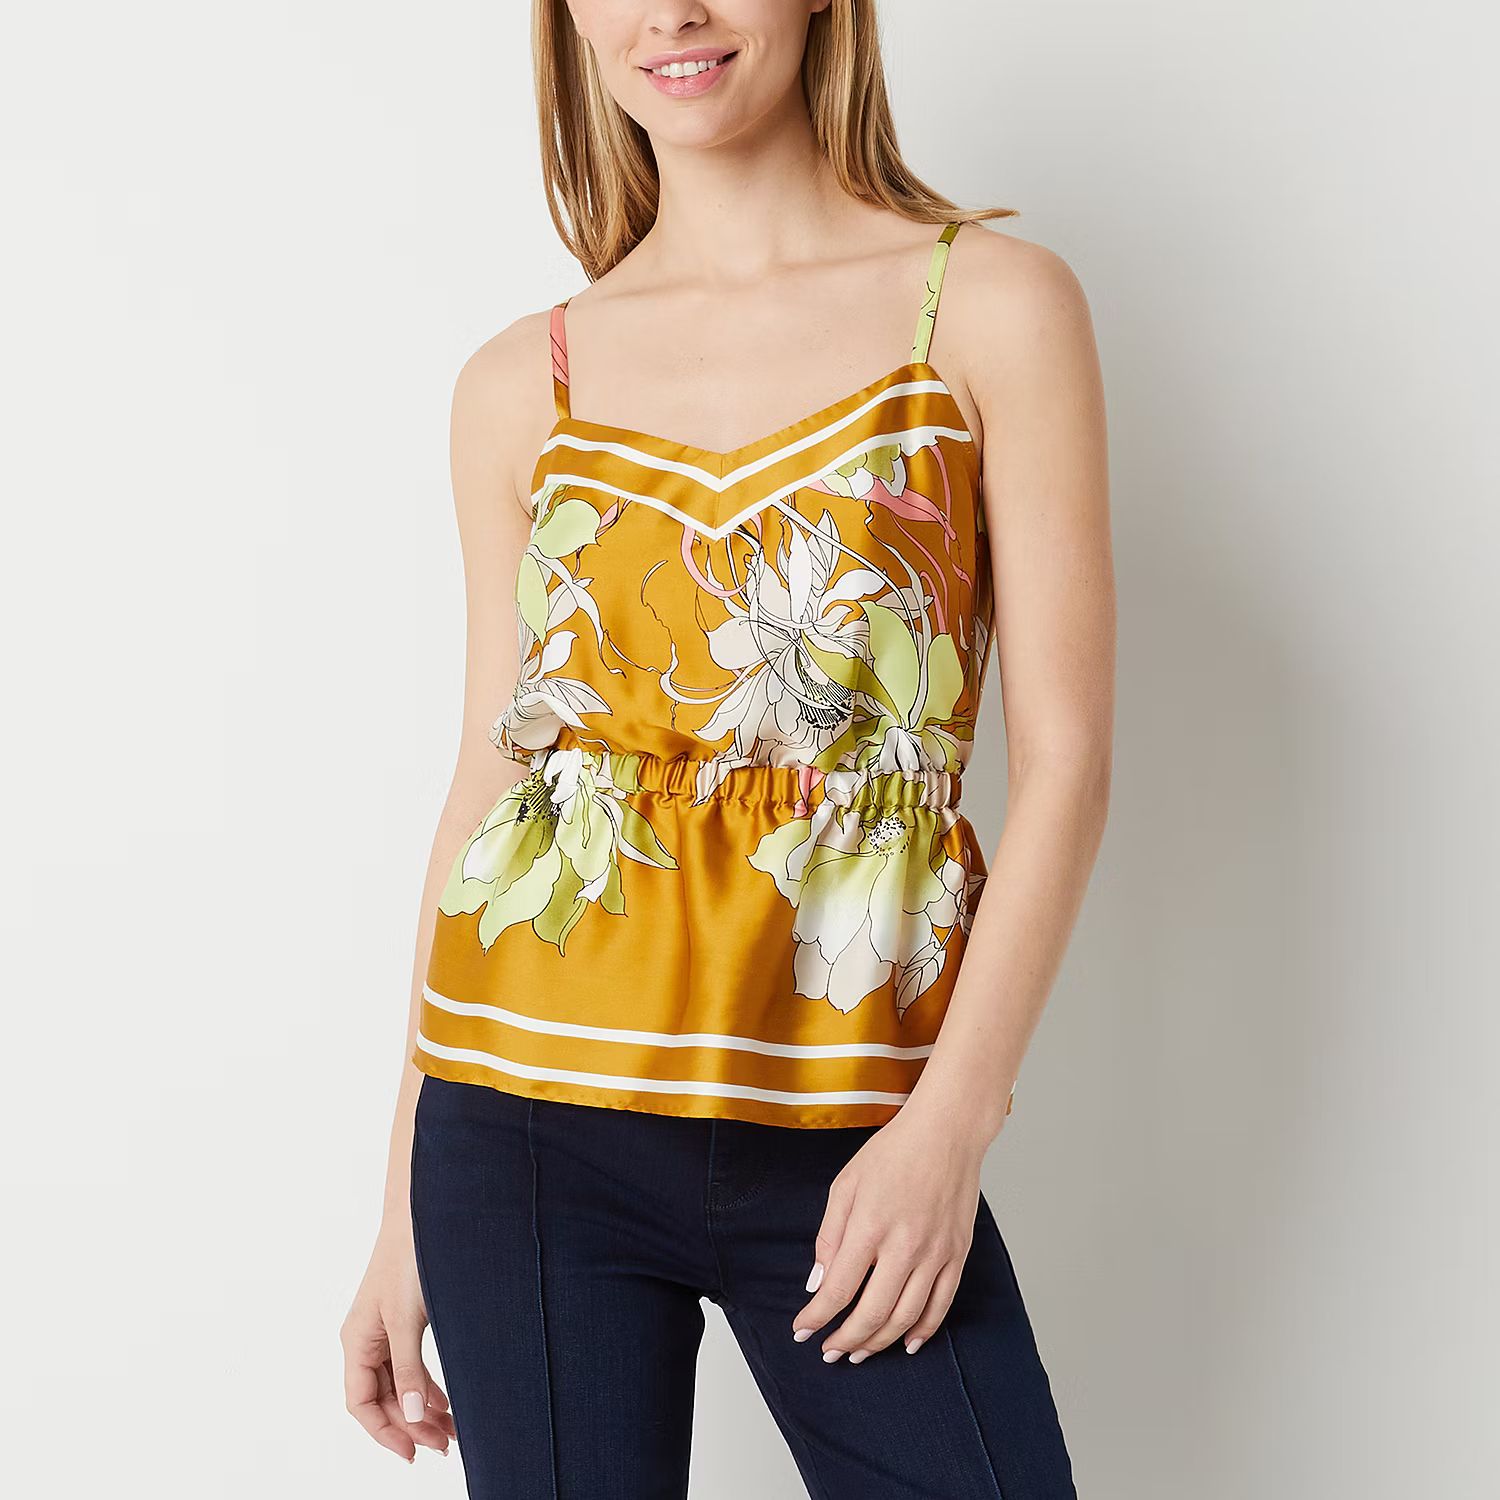 new!Ryegrass Womens Sweetheart Neck Camisole | JCPenney